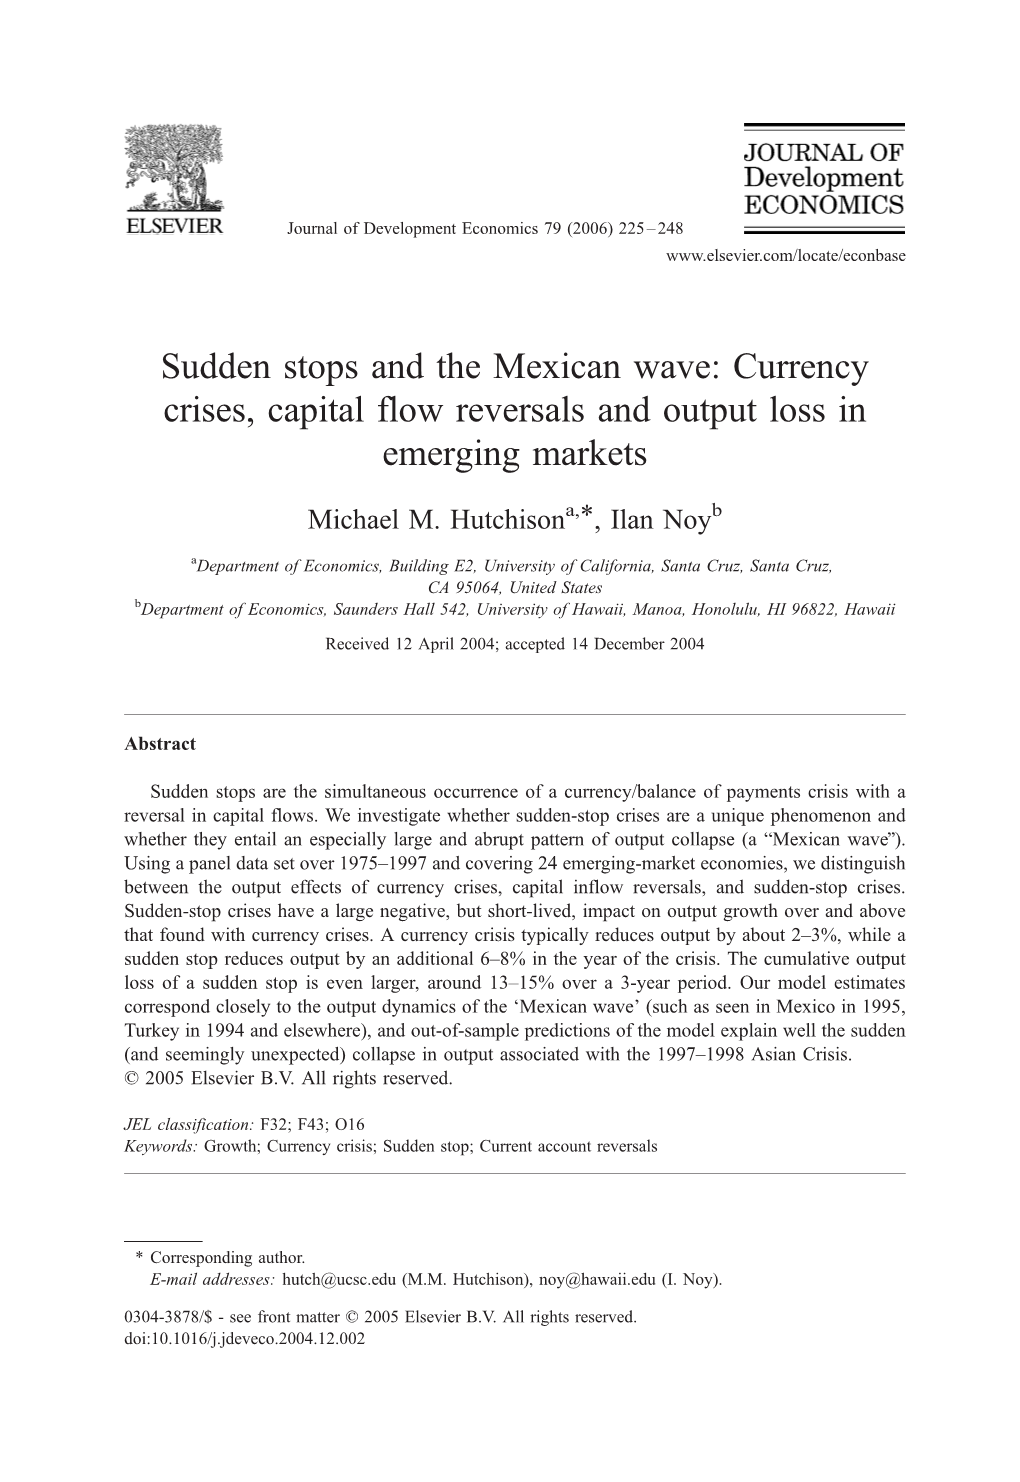 Sudden Stops and the Mexican Wave: Currency Crises, Capital Flow Reversals and Output Loss in Emerging Markets